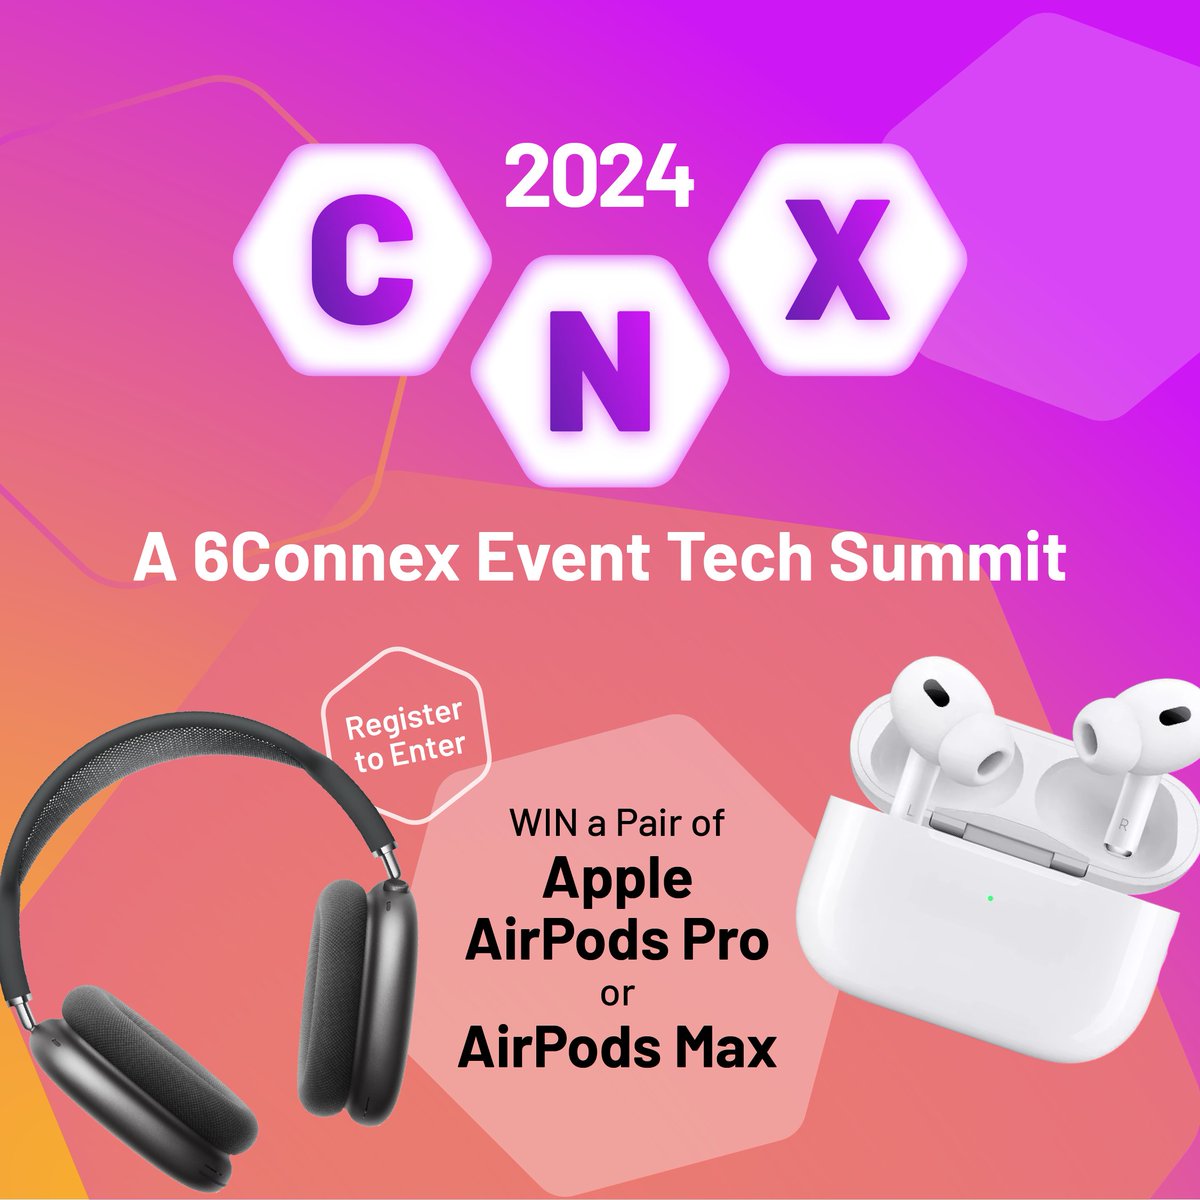 CNX 2024 is today! We start in about 60 minutes, so grab your coffee and join us for a journey through the best case studies, insightful sessions on sustainability, multi-format events, and storytelling! And there's still time to enter our raffle! hubs.ly/Q02rZrFx0